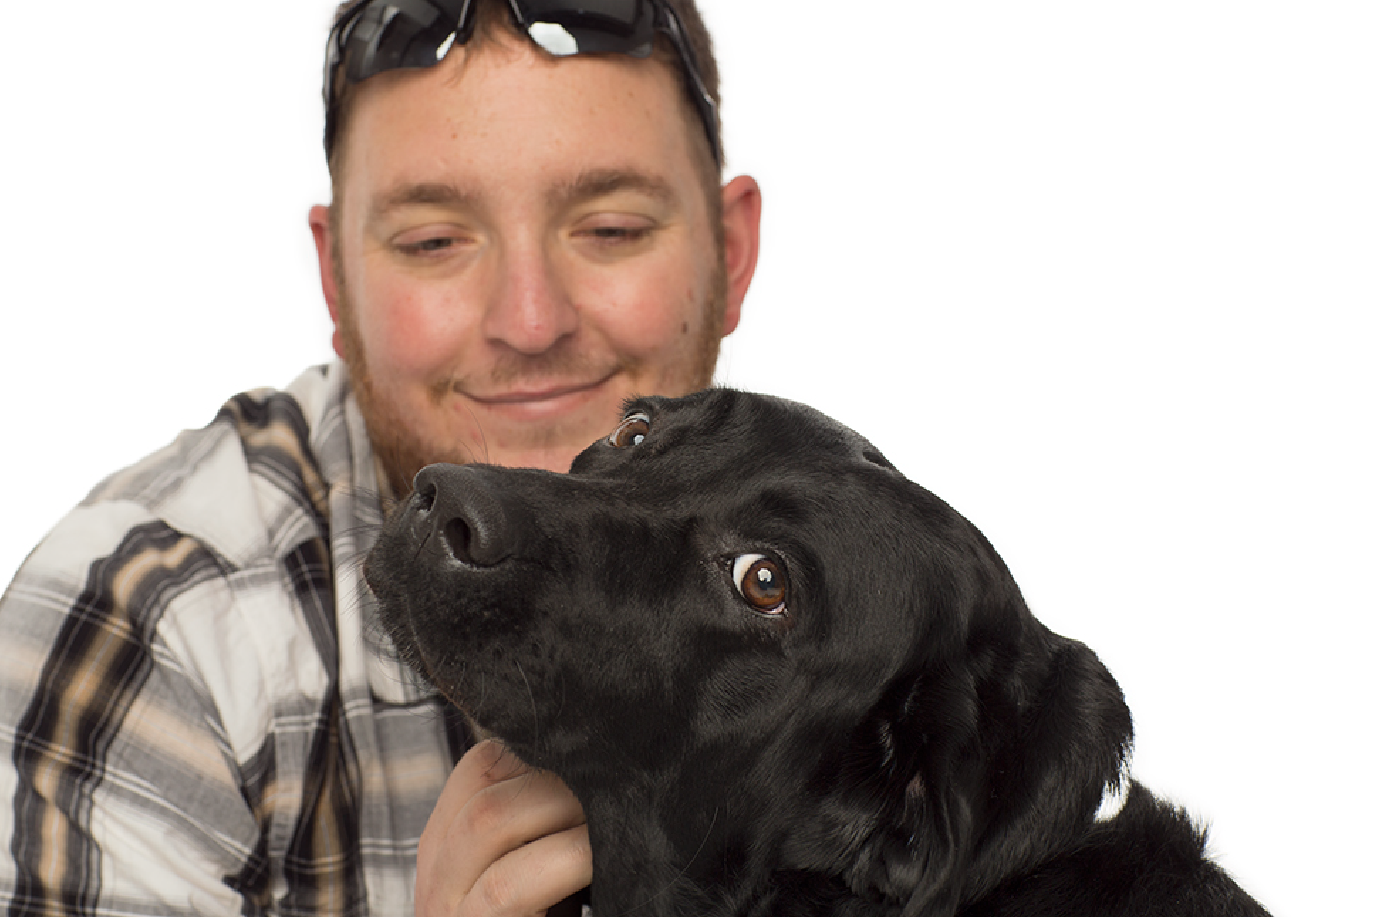 U.S. Army veteran and his service dog